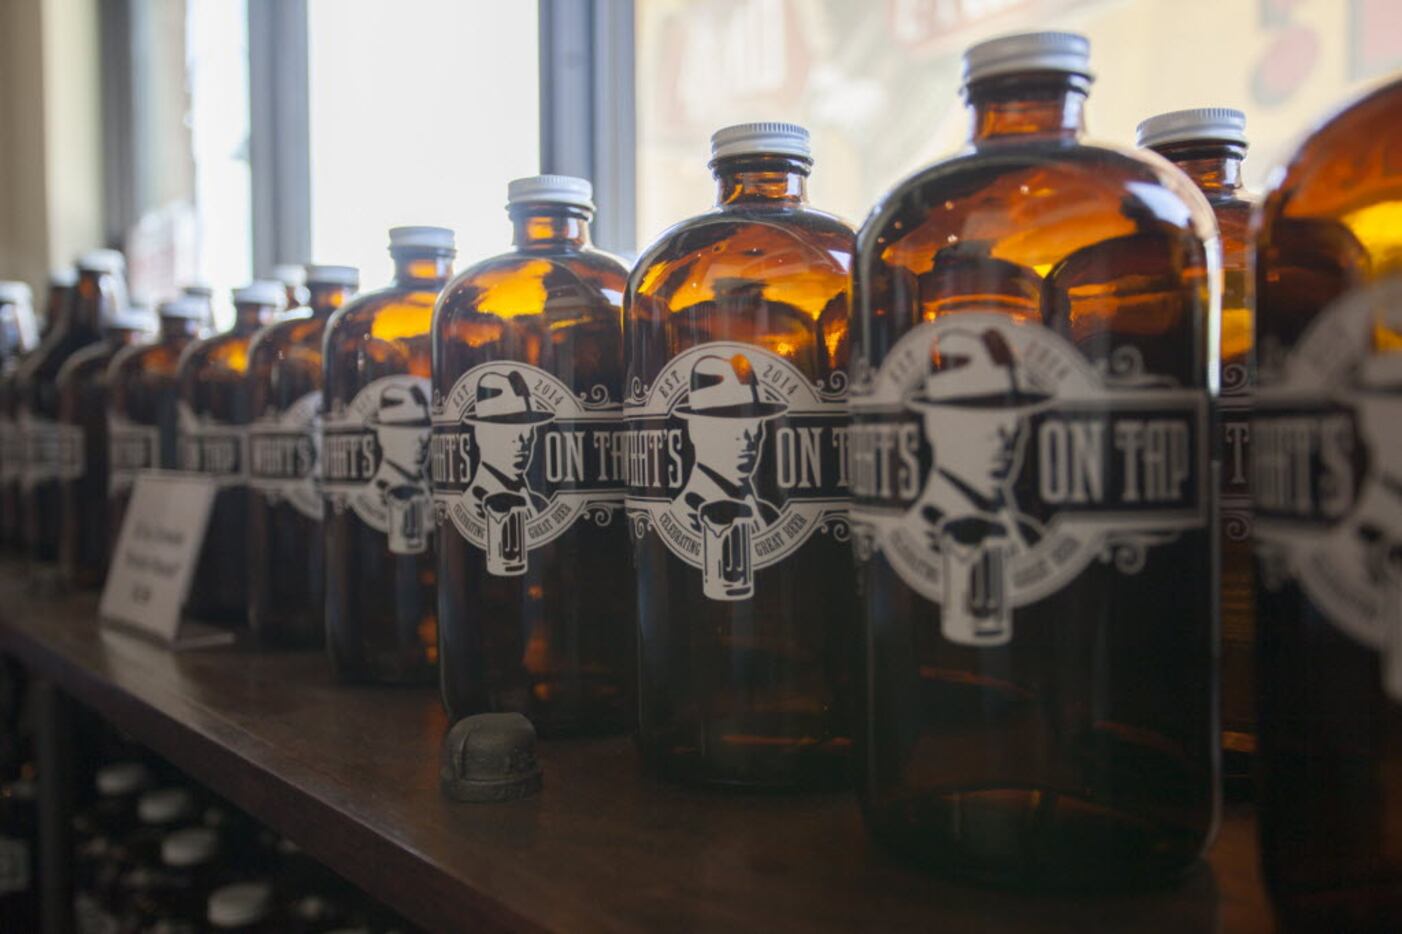 What's On Tap sells growlers to fill up at their taps for customers to take home.